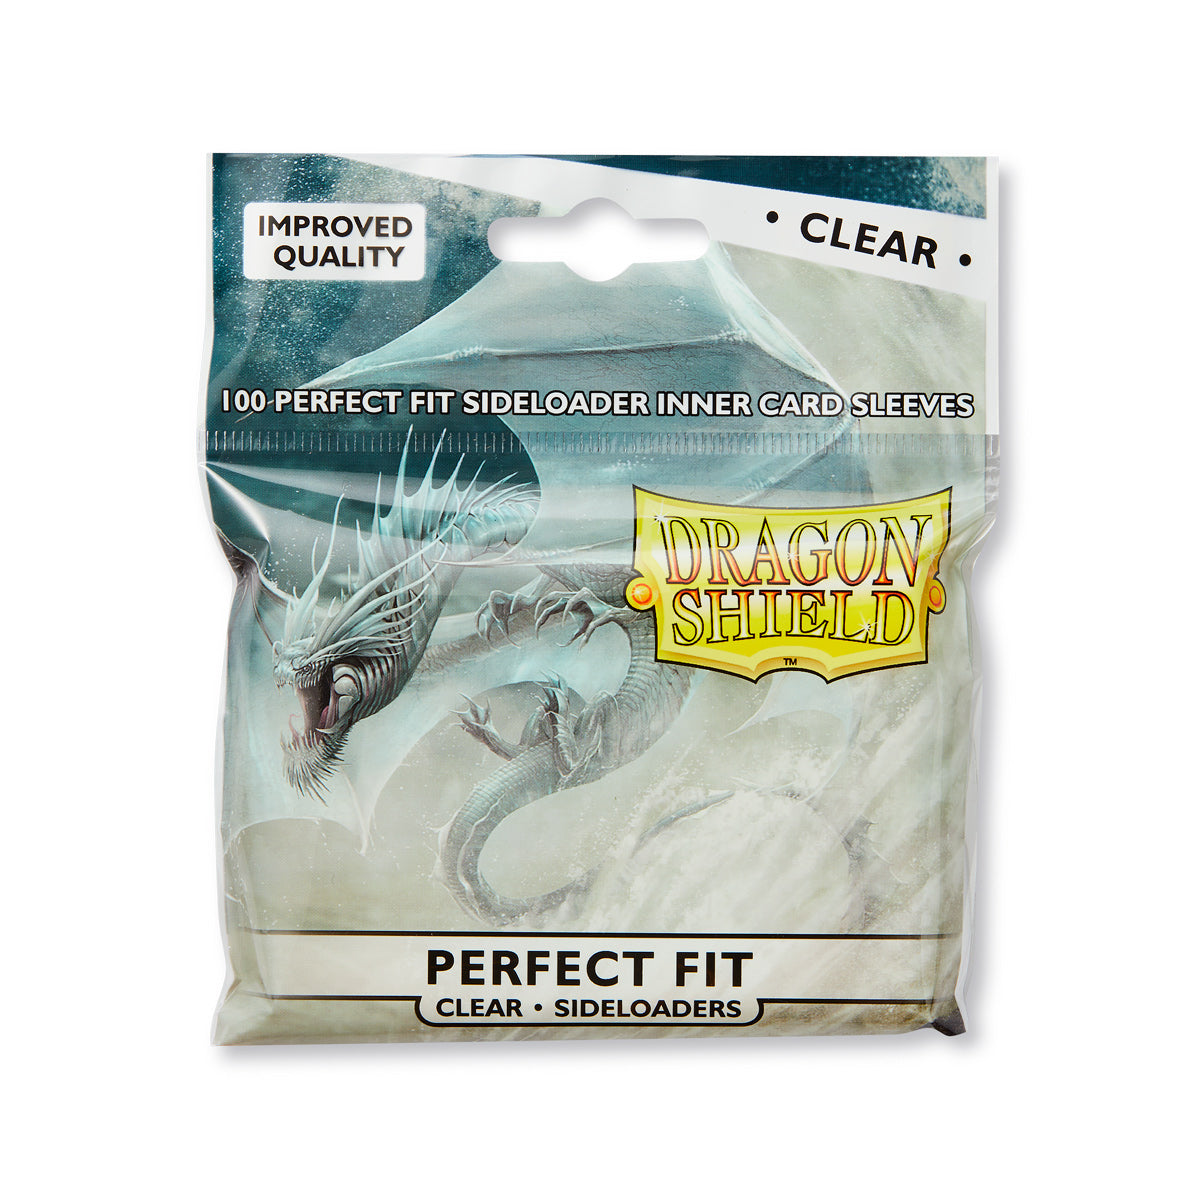 Sleeves - Dragon Shield - Perfect Fit  Inner Sleeves SIDELOADER 100/pack Clear